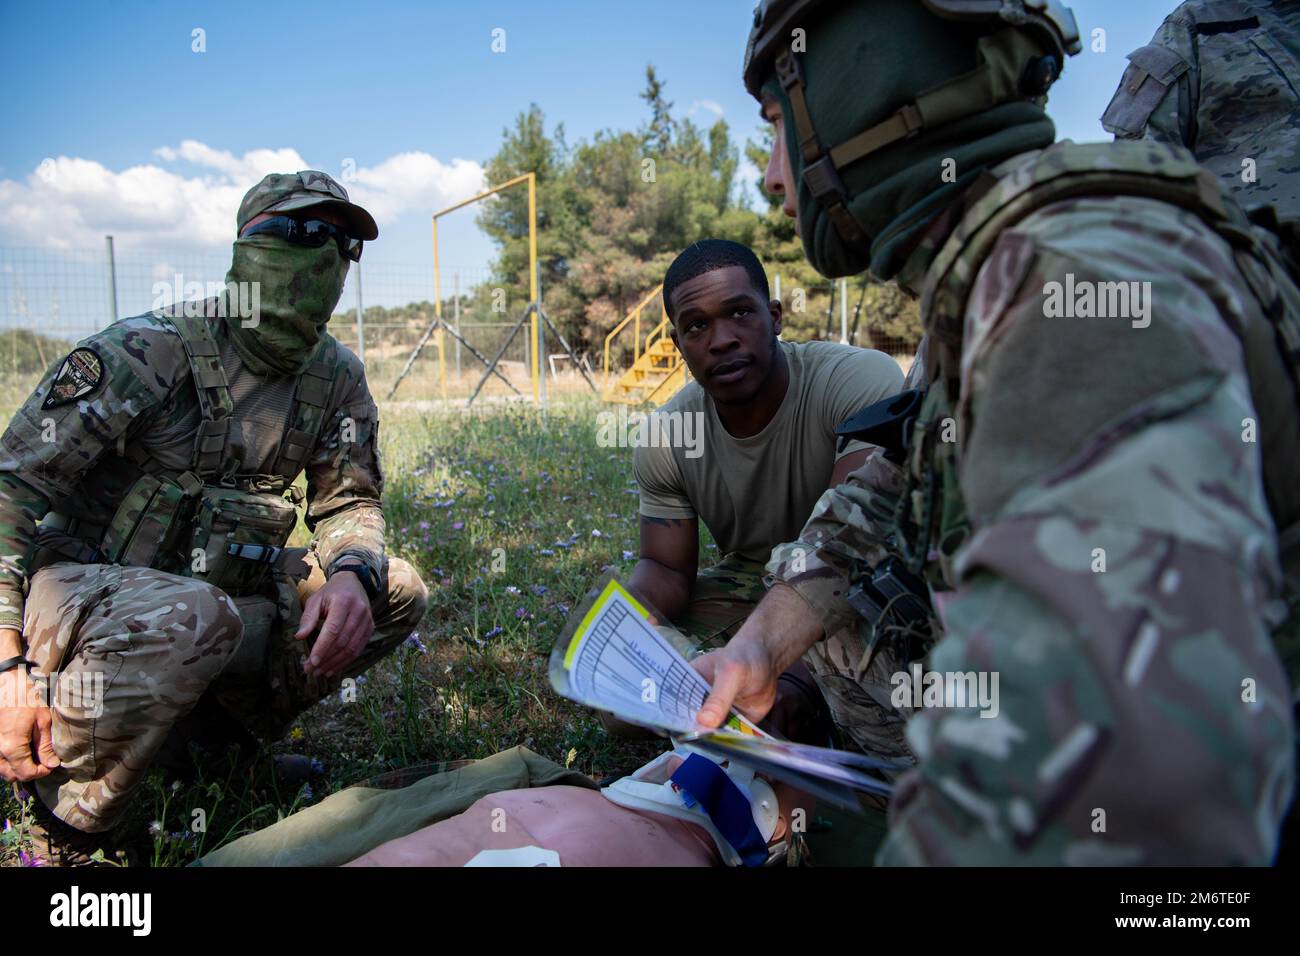 U.S. Air Force Staff Sgt. Kamarley Campbell assists Hellenic Air Force members during simulated aeromedical evacuation during Stolen Cerberus IX at Elefsina Air Base, Greece, May 5, 2022. Campbell assisted in providing oxygen to patients after only gaining minimal injuries during the simulation. Stolen Cerberus improves overall coordination with allies and partner militaries, assuring the U.S. commitment to increasing the alliance's forces' capability, readiness, and responsiveness. Stock Photo